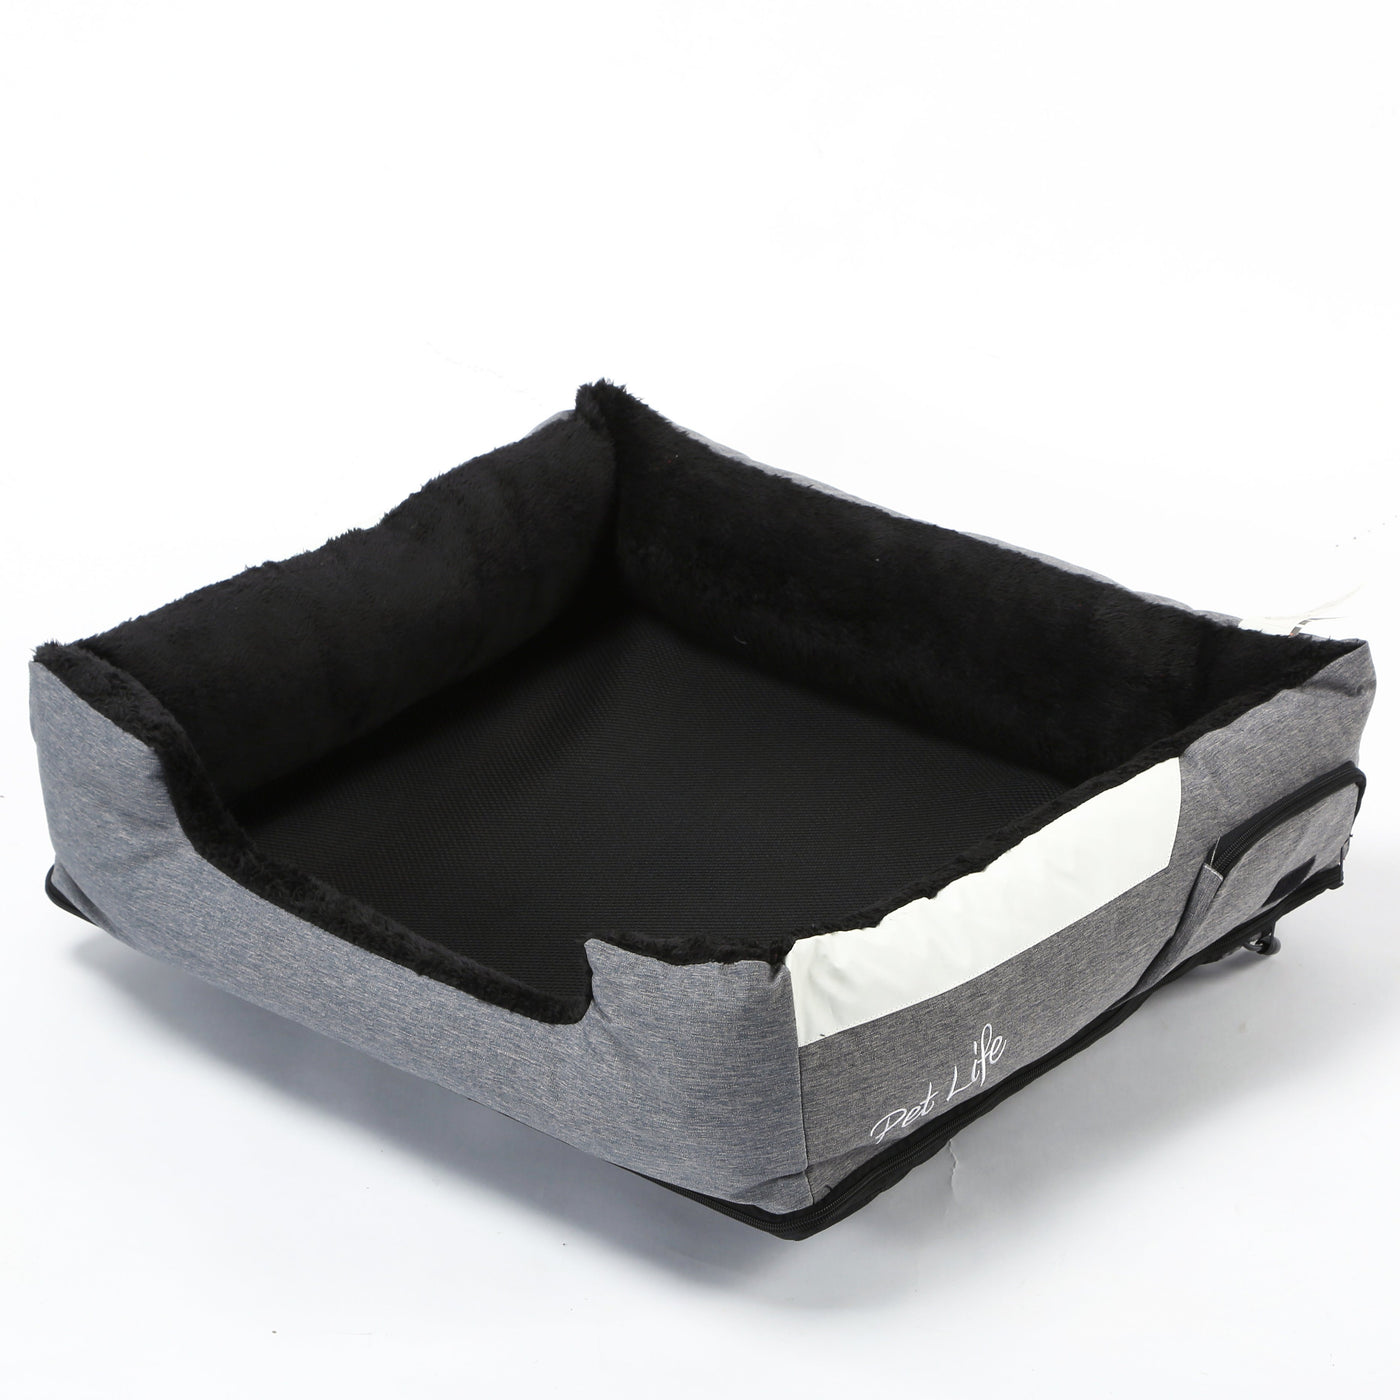 Large Cat Carrier For 2 Cats Small Medium Dogs, Soft Pet Carrier For  Traveling With Warm Blanket Foldable Bowl And Washable Pad